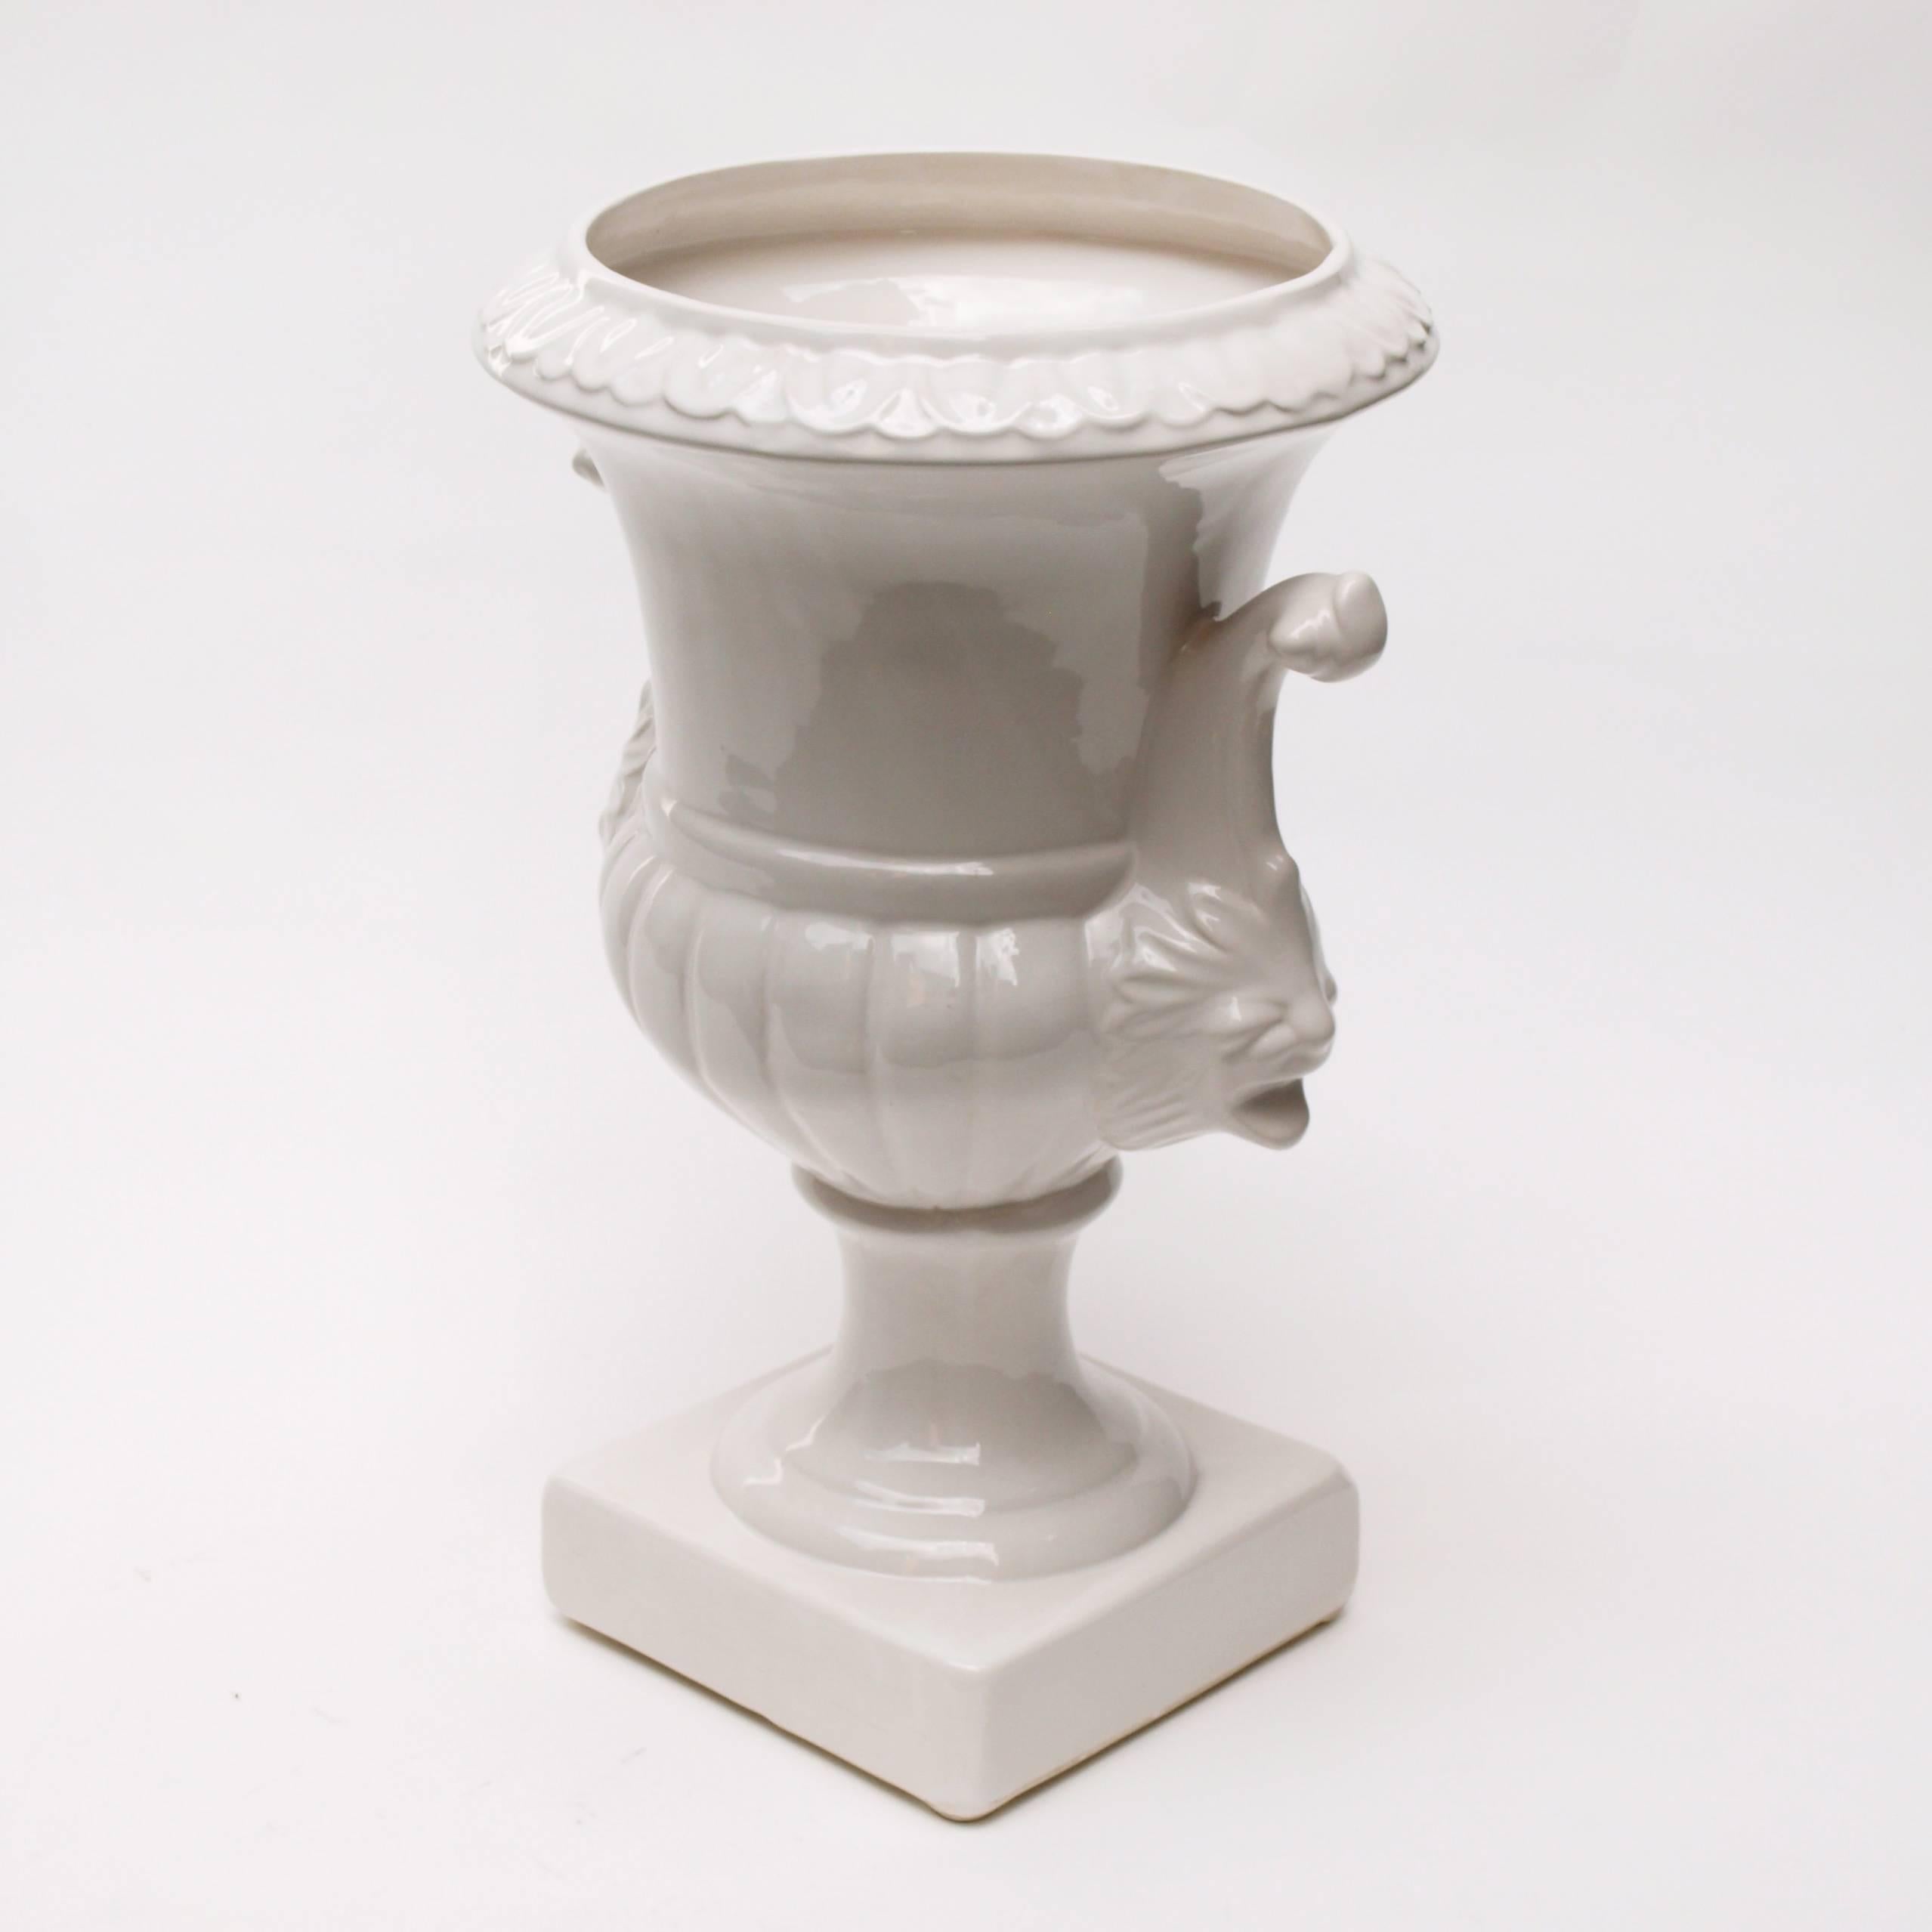 A large white glazed ceramic urn in a classical style, with lion head handle details and a leaf pattern circling the top of the vase. This sizable urn can be used outdoors or indoors as a planter or vase.